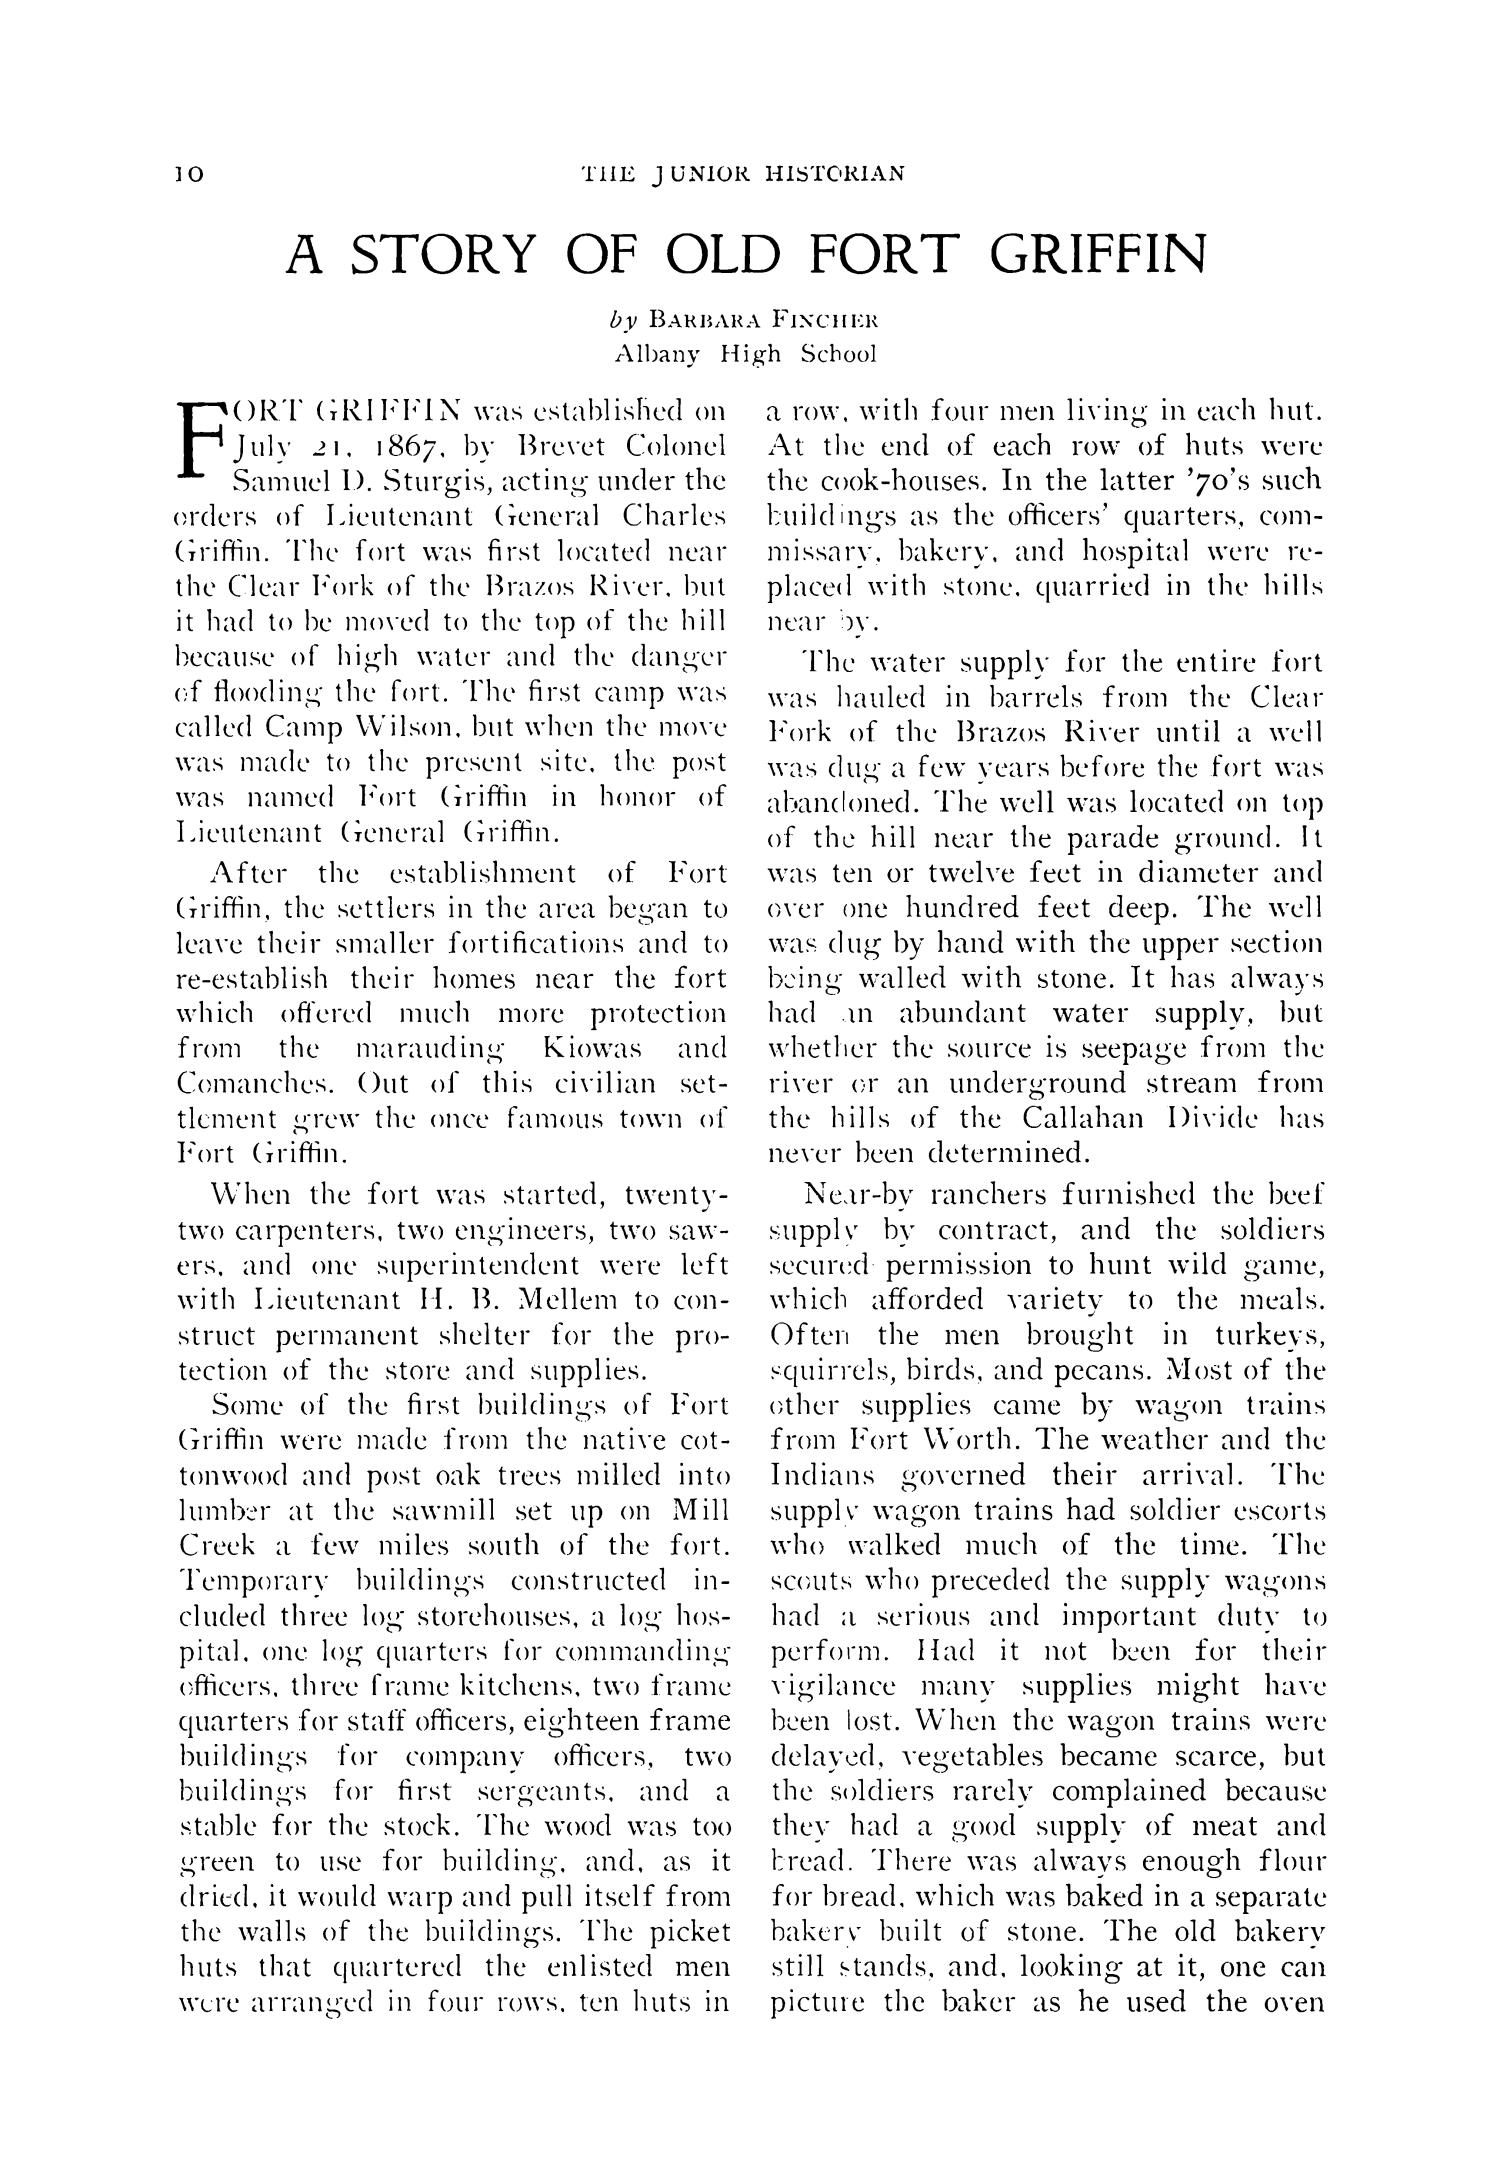 The Junior Historian, Volume 7, Number 5, March 1947
                                                
                                                    10
                                                